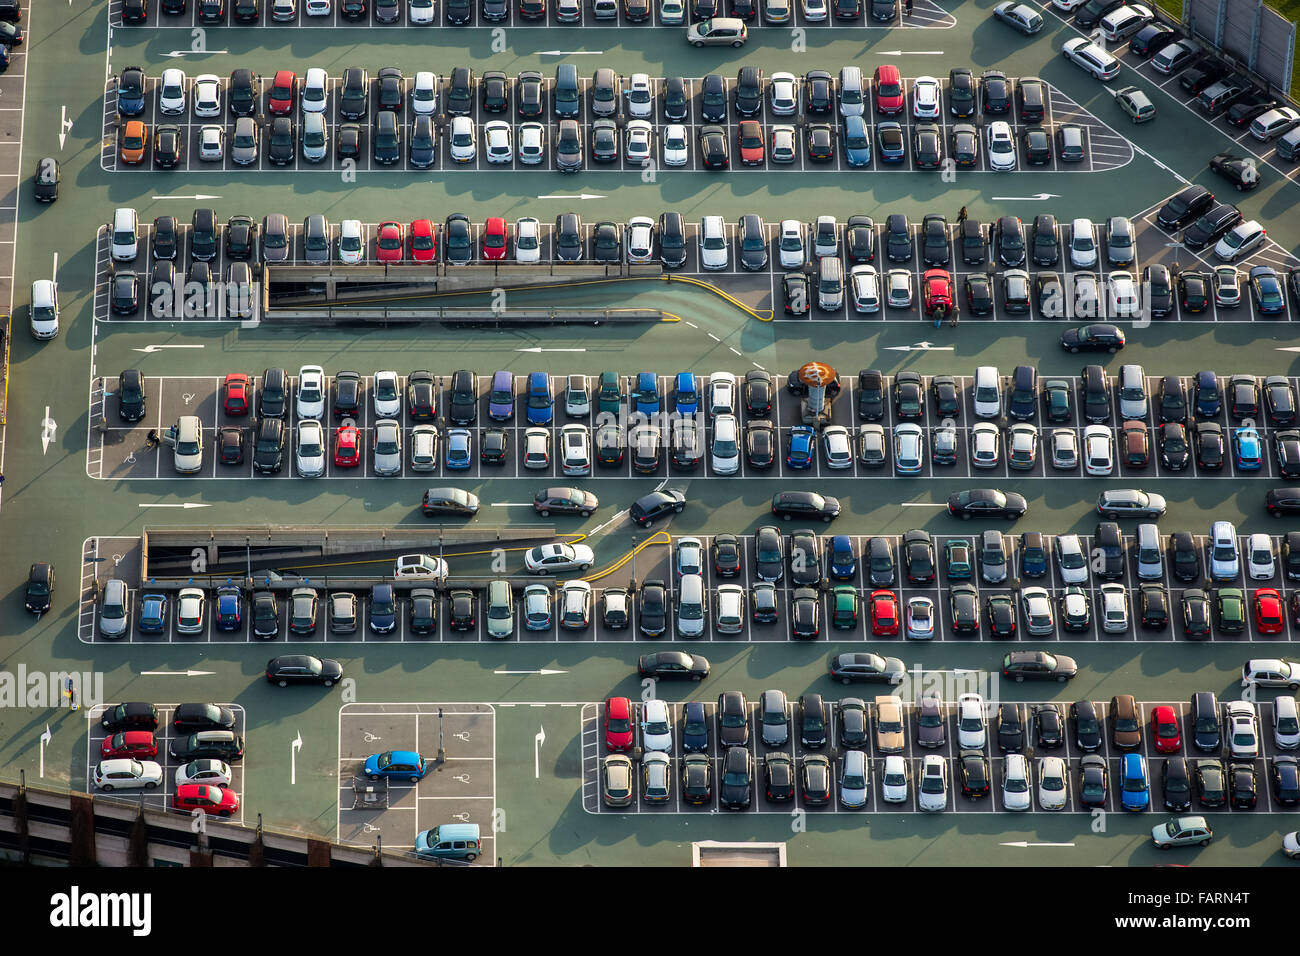 Aerial view, parking, car parks, shopping mall CentrO Oberhausen, shopping mall, largest shopping and leisure center in Europe, Stock Photo